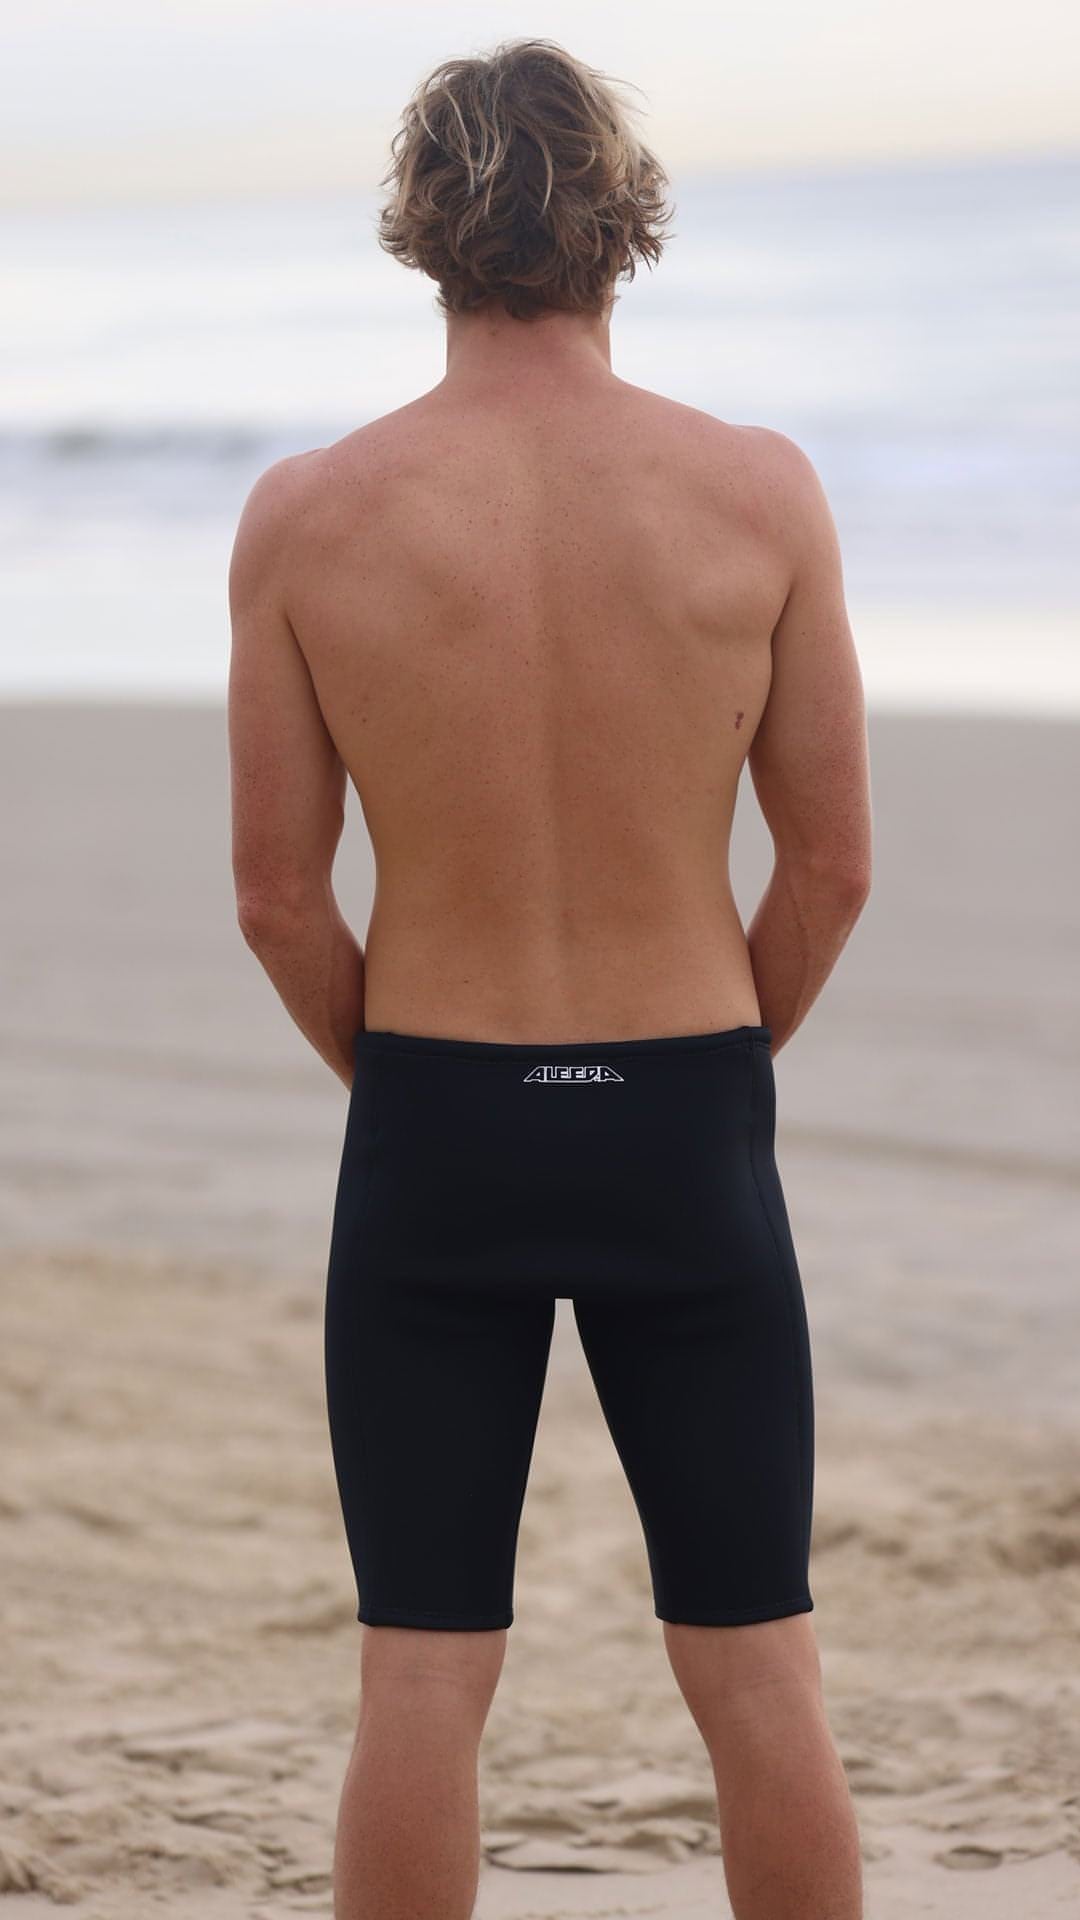 Wetsuit shorts, Pants, 2mm, Mens, Adult - back shot at the beach